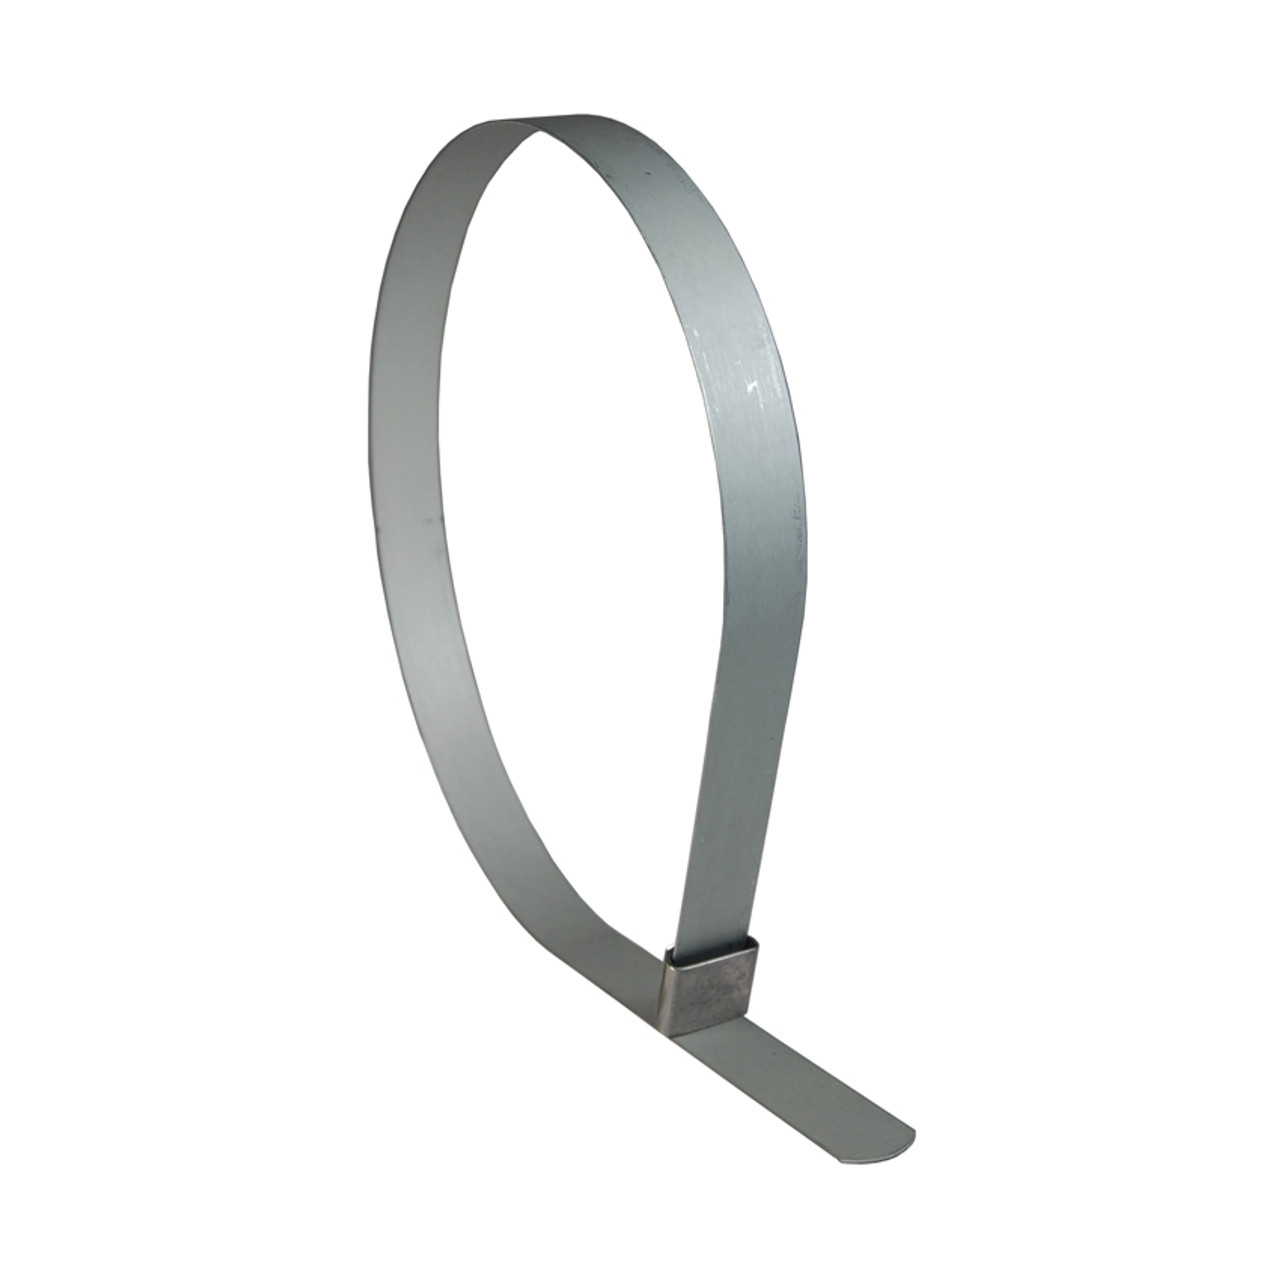 Punch Type Clamp - 2 Clamp ID x 5/8 Band Width - Galvanized